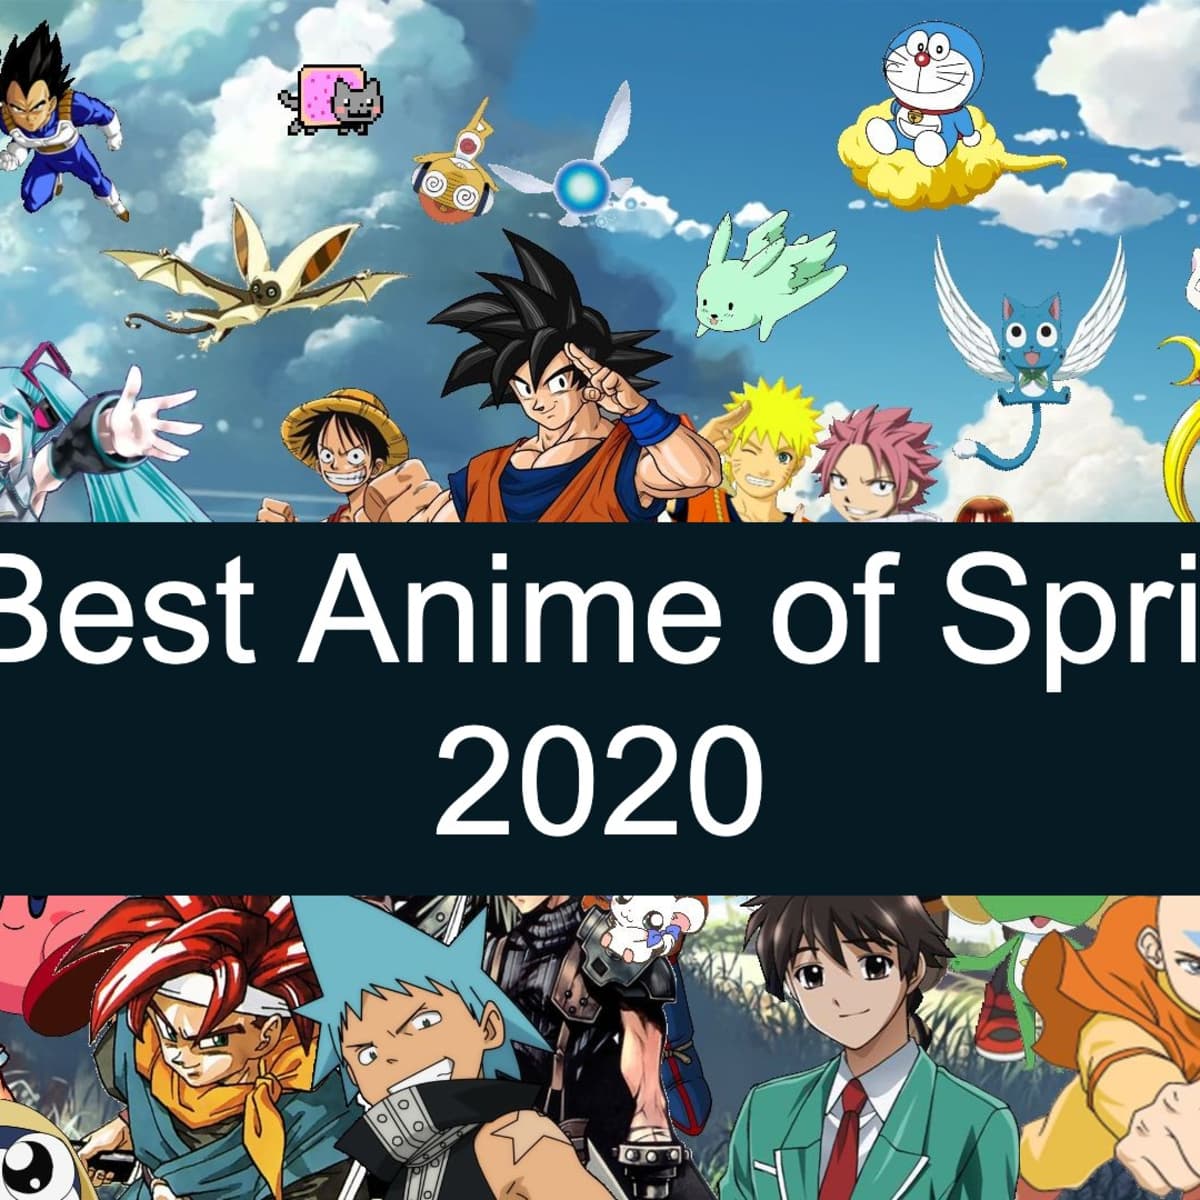 Best Anime Shows Of 2020 Per The BuzzFeed Community